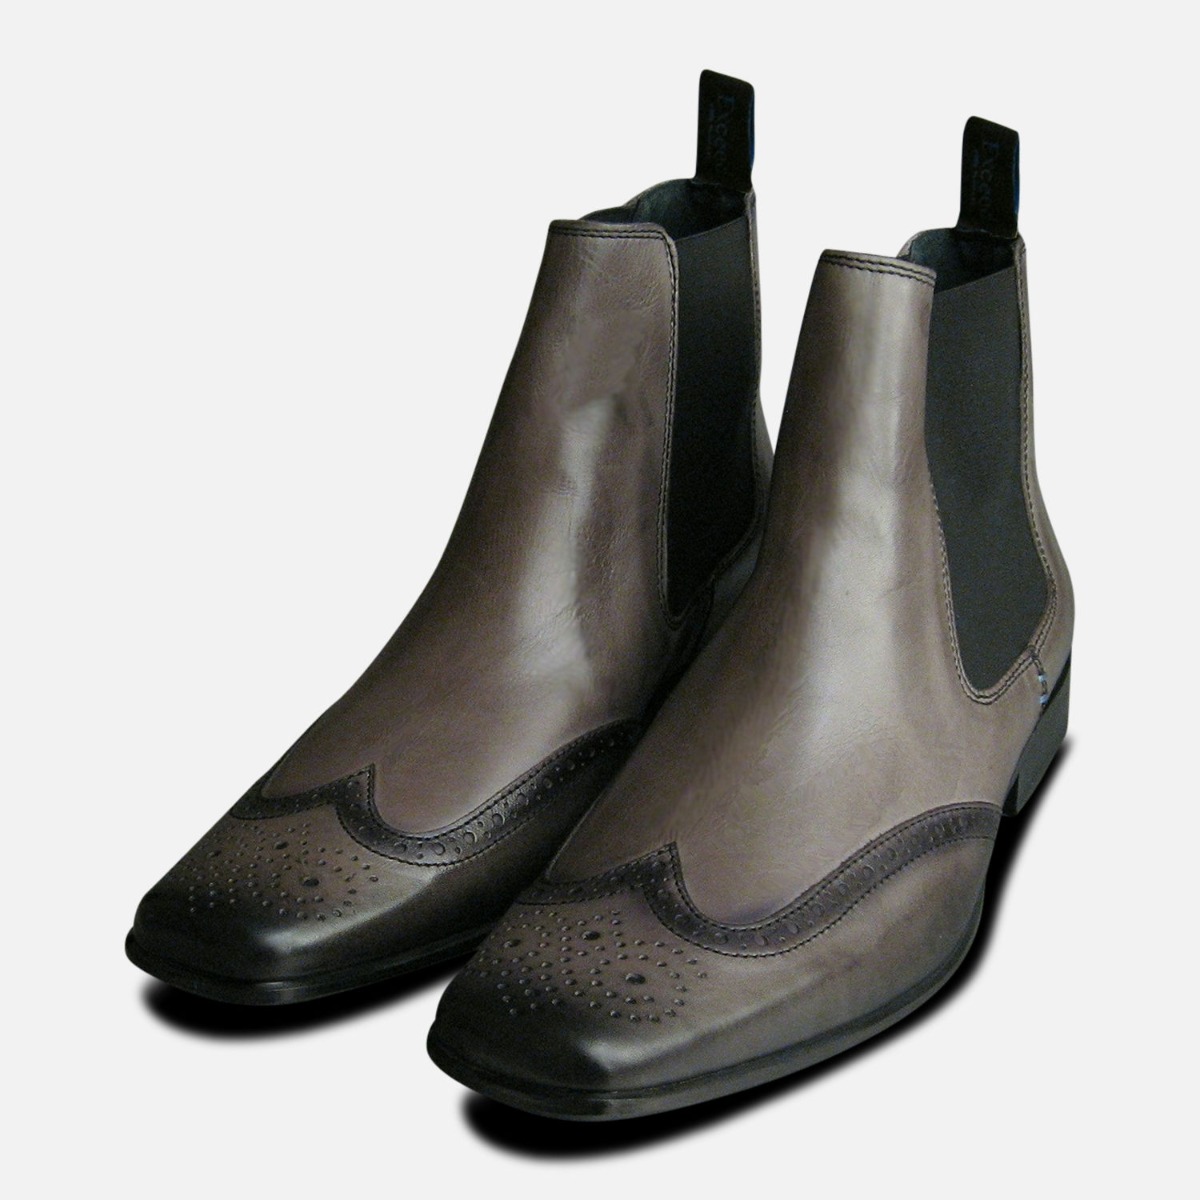 gray mens chelsea boots